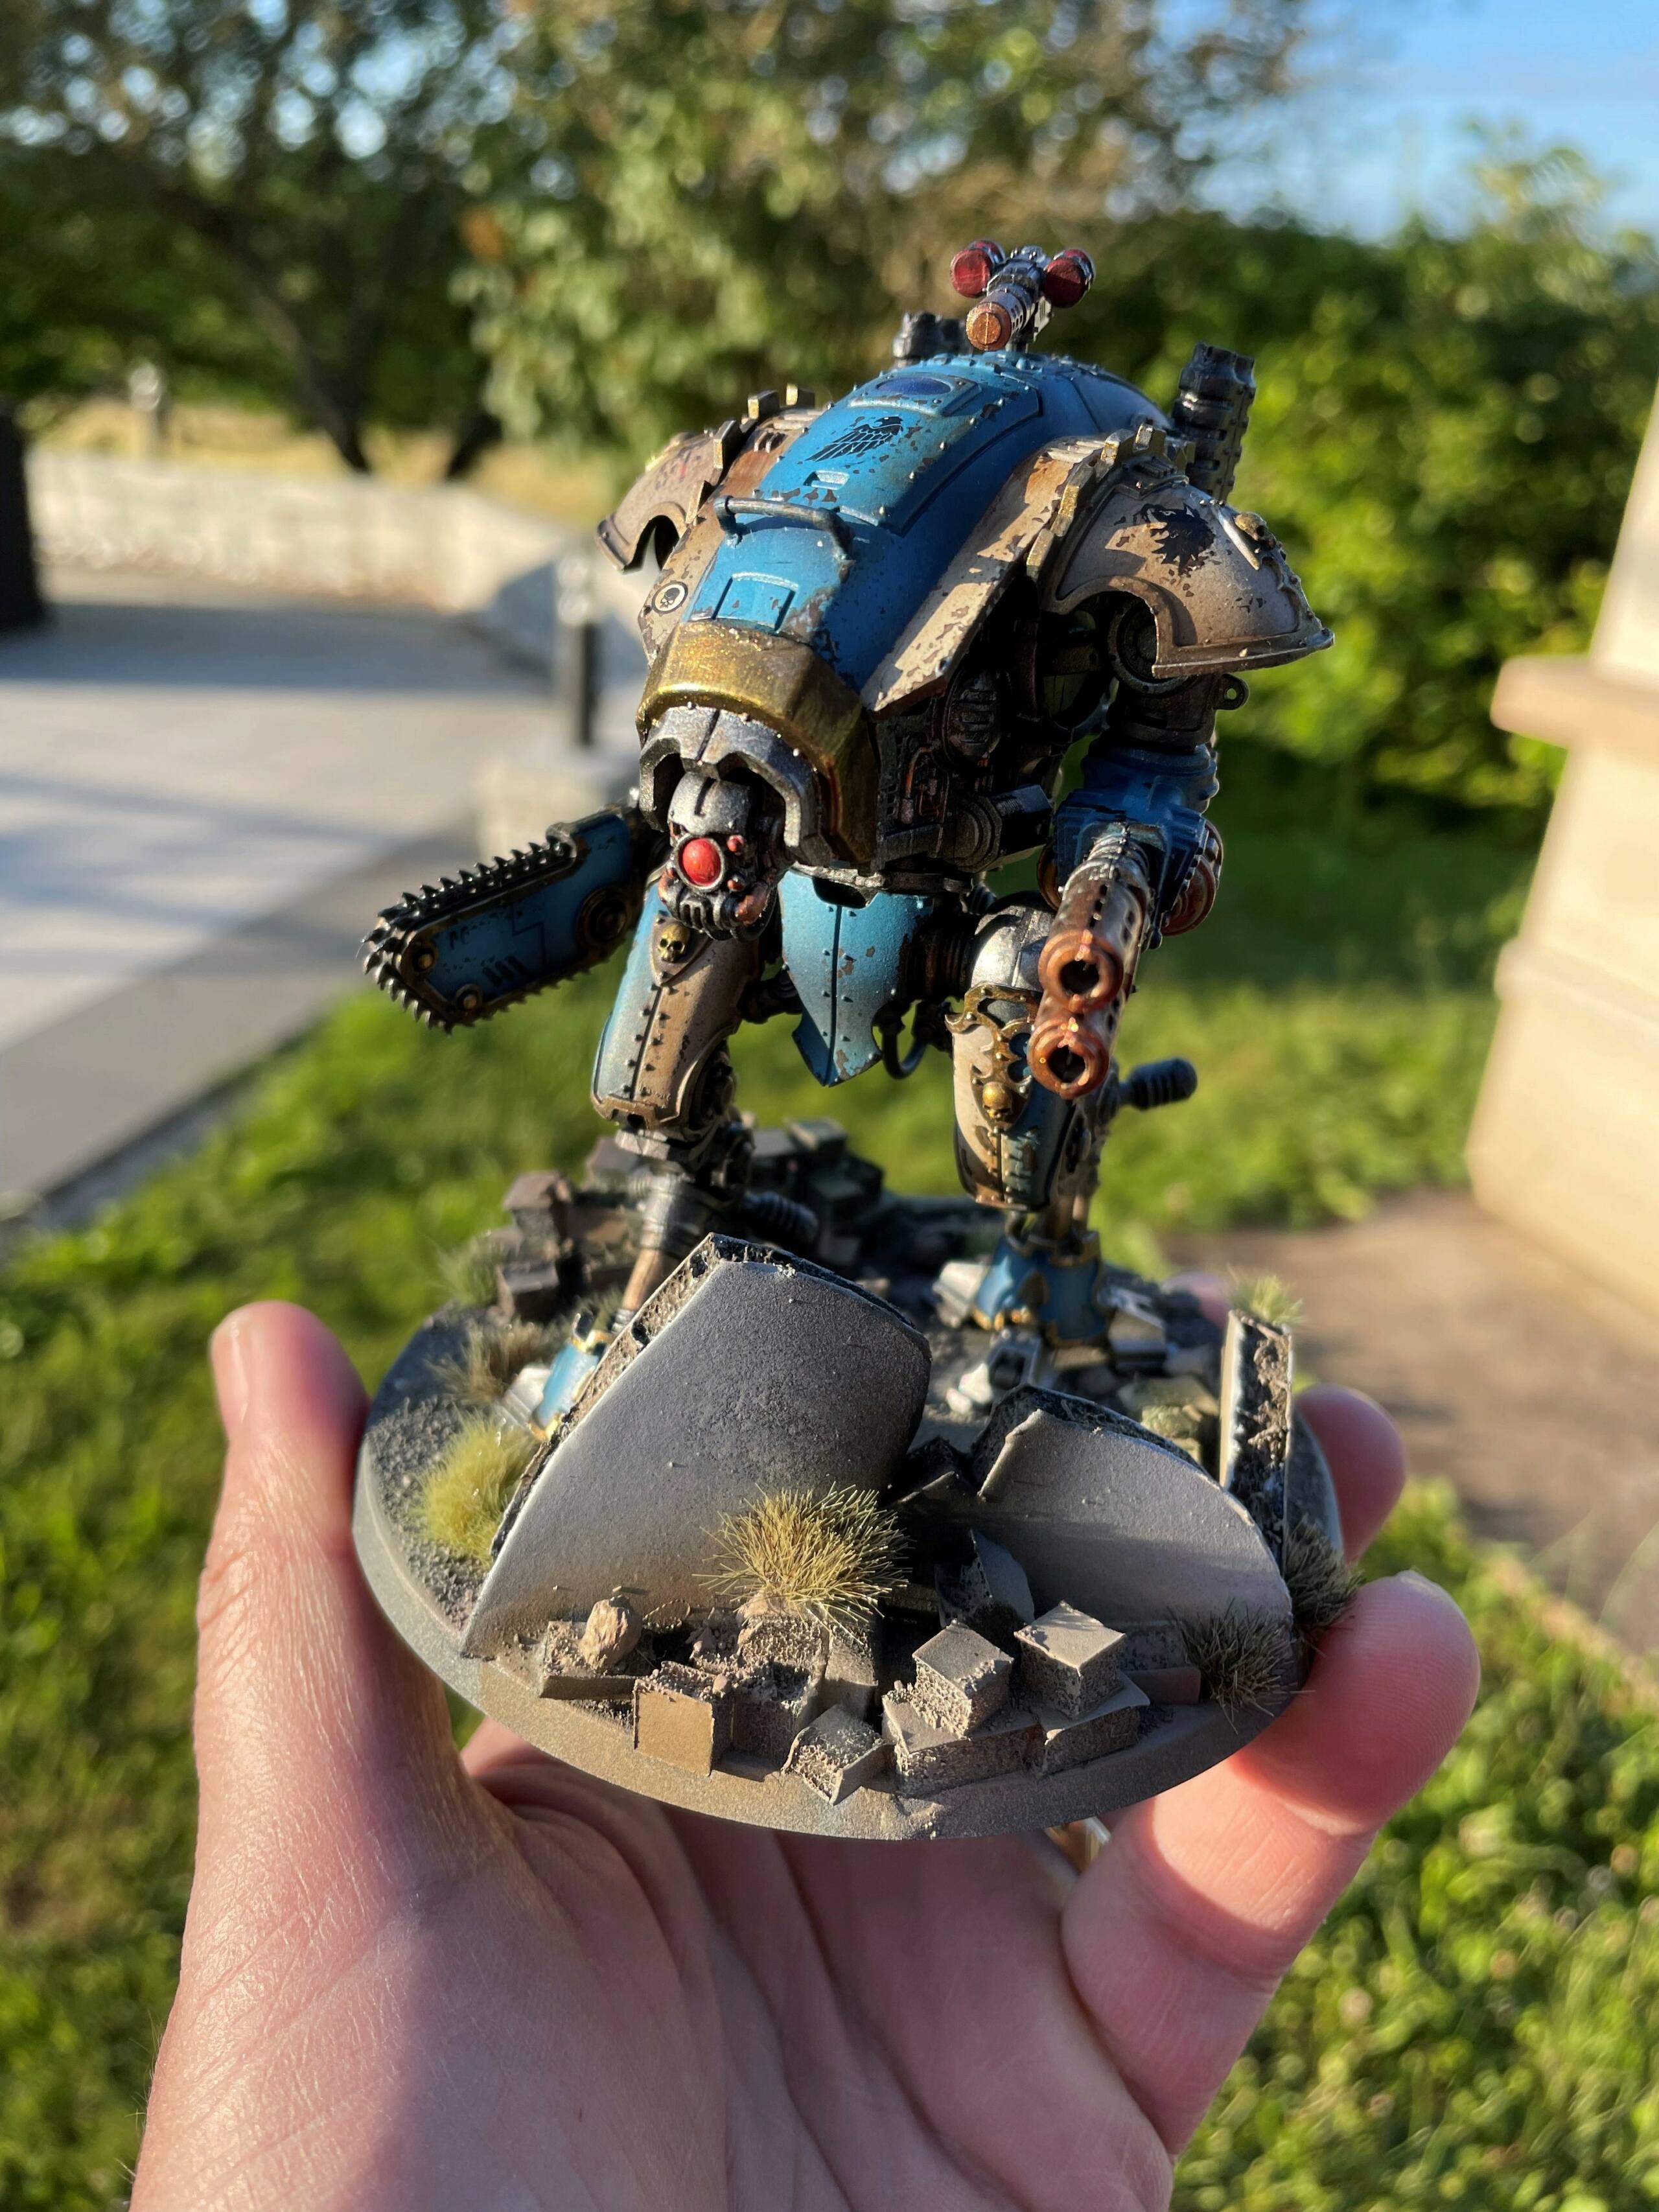 [Fini]-[NHAWKS] - Chevalier Classe WARGLAIVE "ARDENTIAN" - 140 points Cheval11